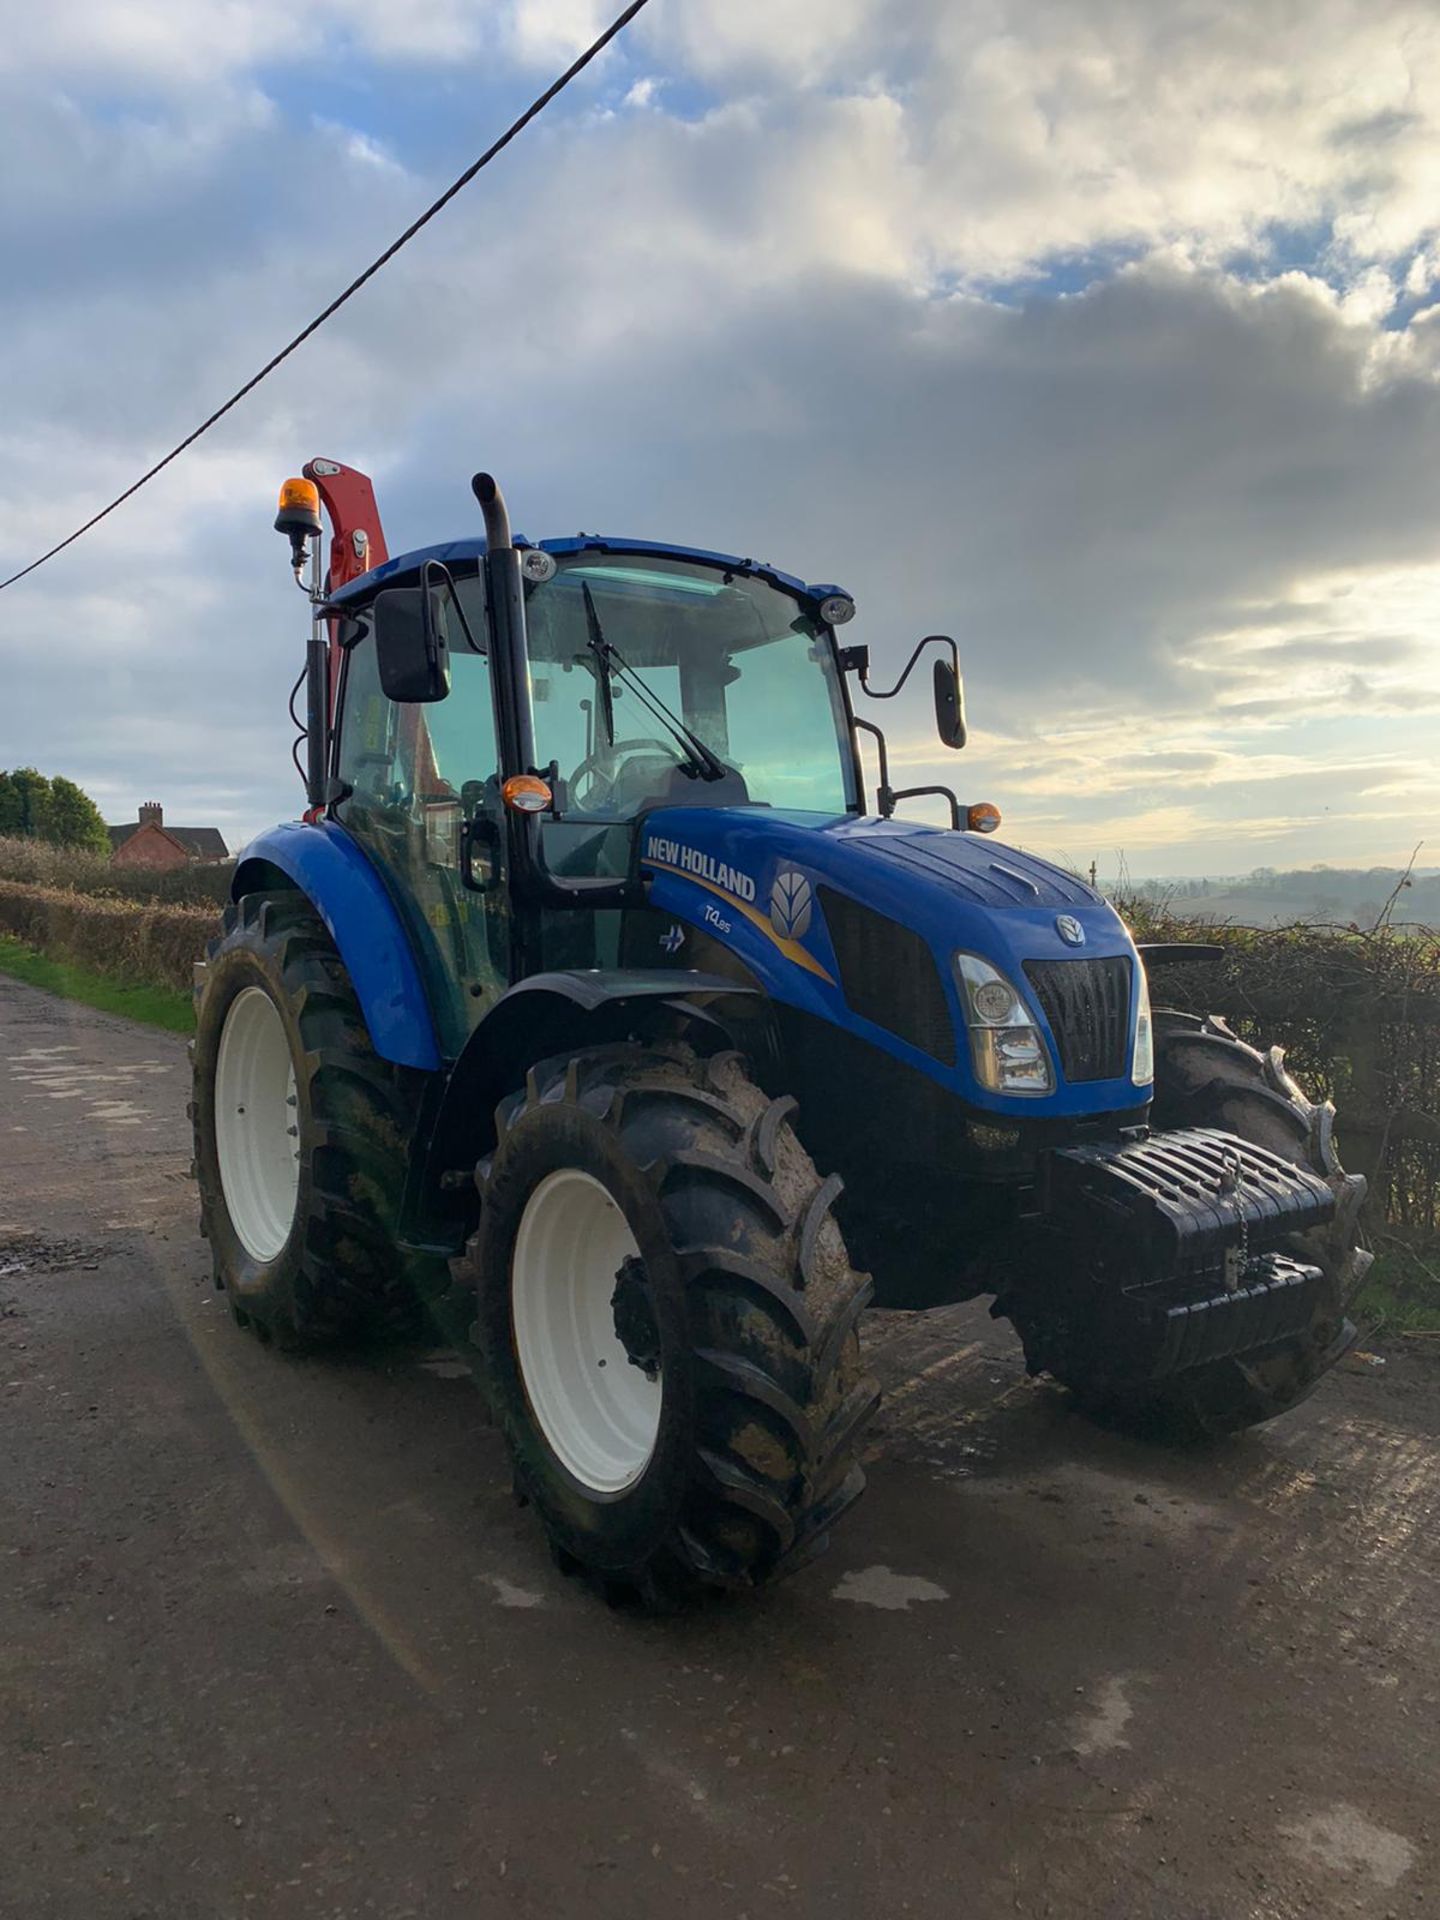 2017/67 REG NEW HOLLAND T4.85 4WD DIESEL TRACTOR, FULL GLASS CAB, HEDGECUTTER SOLD SEPERATELY